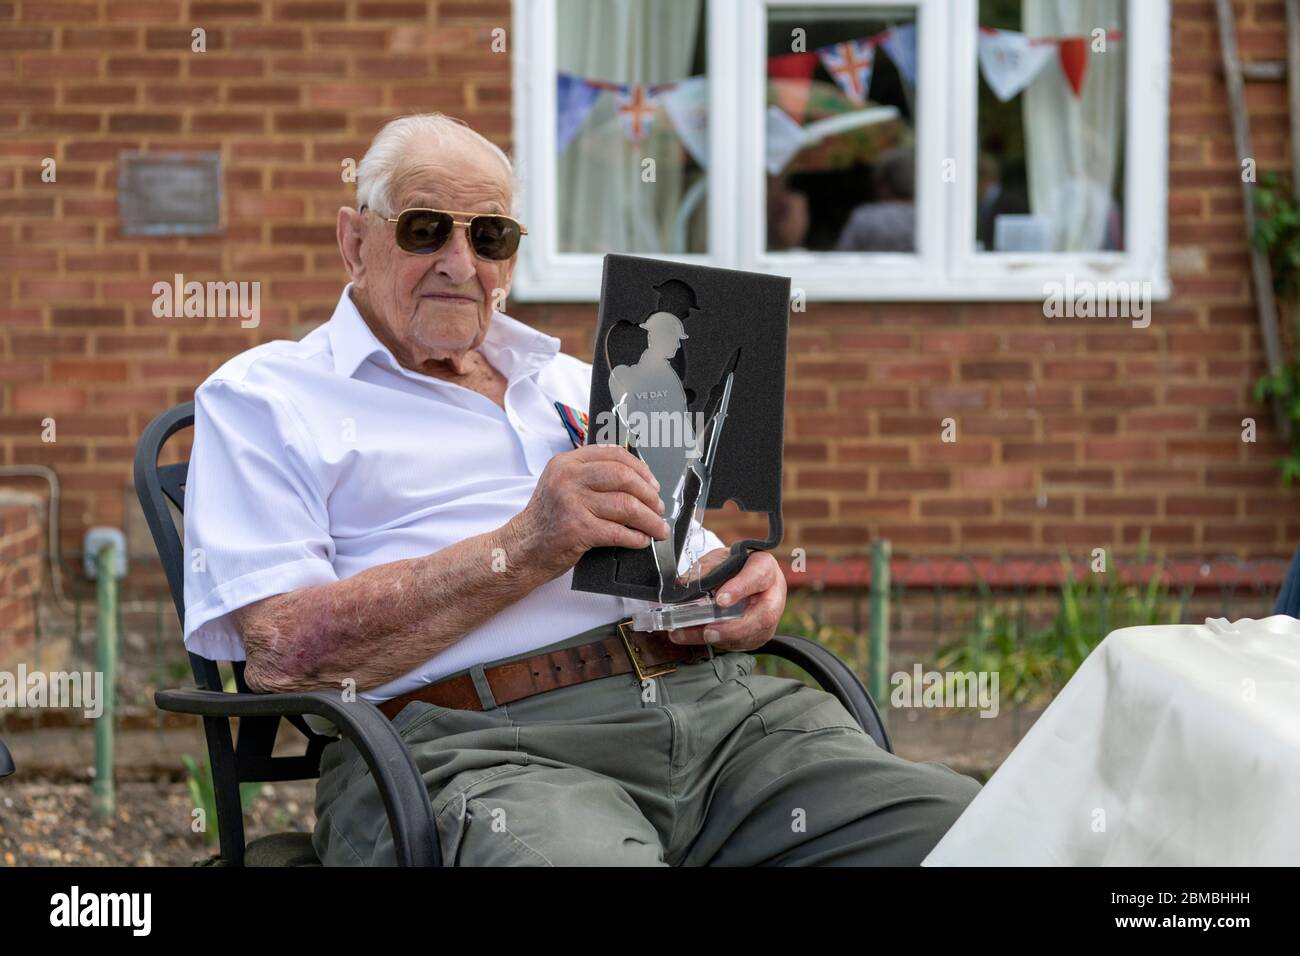 Over, Cambridgeshire, UK. 8th May, 2020. WWII Veteran Cyril Cook, enjoys a garden party at his home to celebrate the 75th Anniversary of VE Day. Aged 98 years he was a Private in the Royal Electrical and Mechanical Engineers. He was presented with a plague and certificate by the local branch of the British Legion and joined by members of his family. Credit: Julian Eales/Alamy Live News Stock Photo